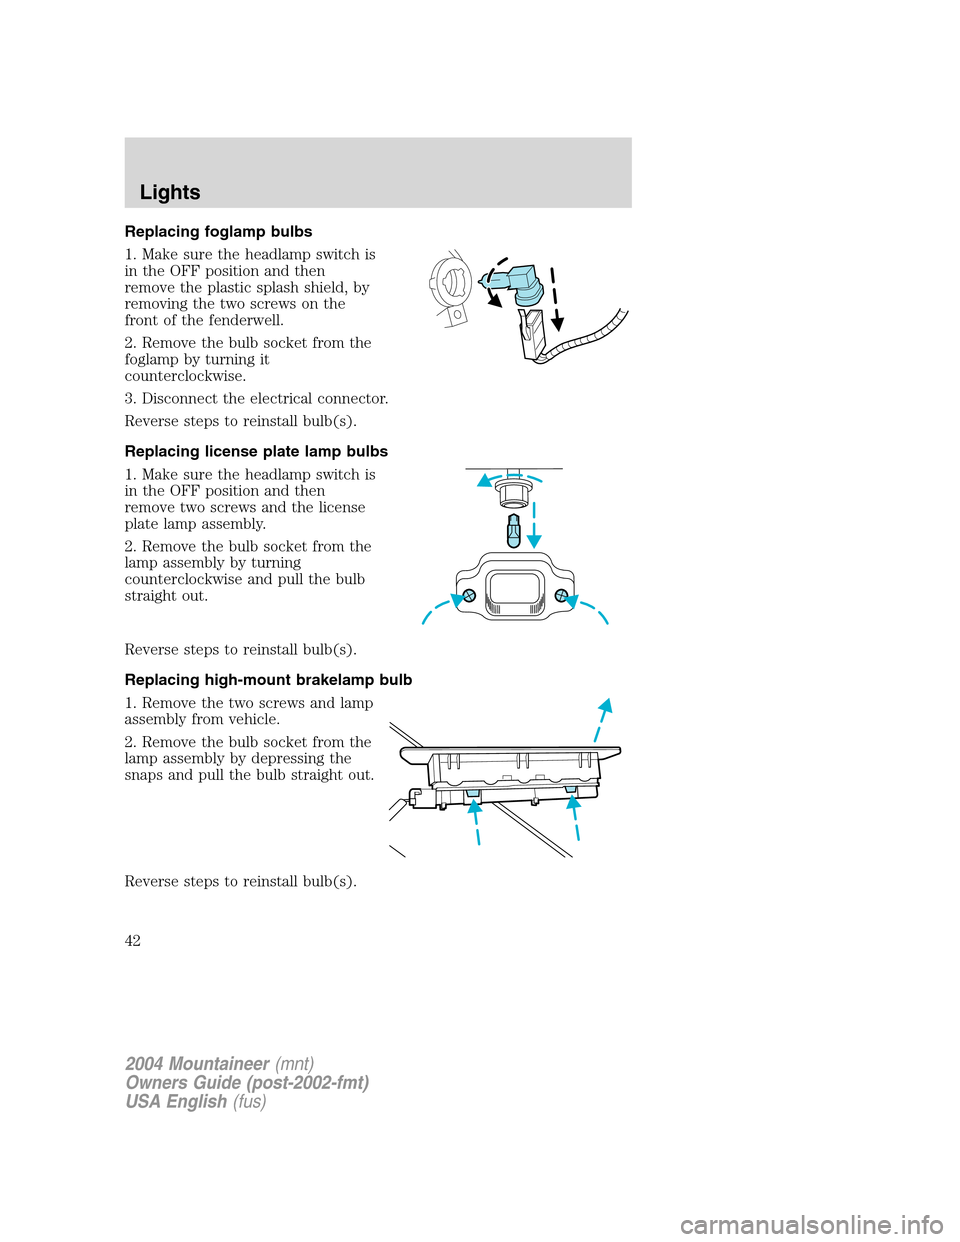 Mercury Mountaineer 2004  Owners Manuals Replacing foglamp bulbs
1. Make sure the headlamp switch is
in the OFF position and then
remove the plastic splash shield, by
removing the two screws on the
front of the fenderwell.
2. Remove the bulb